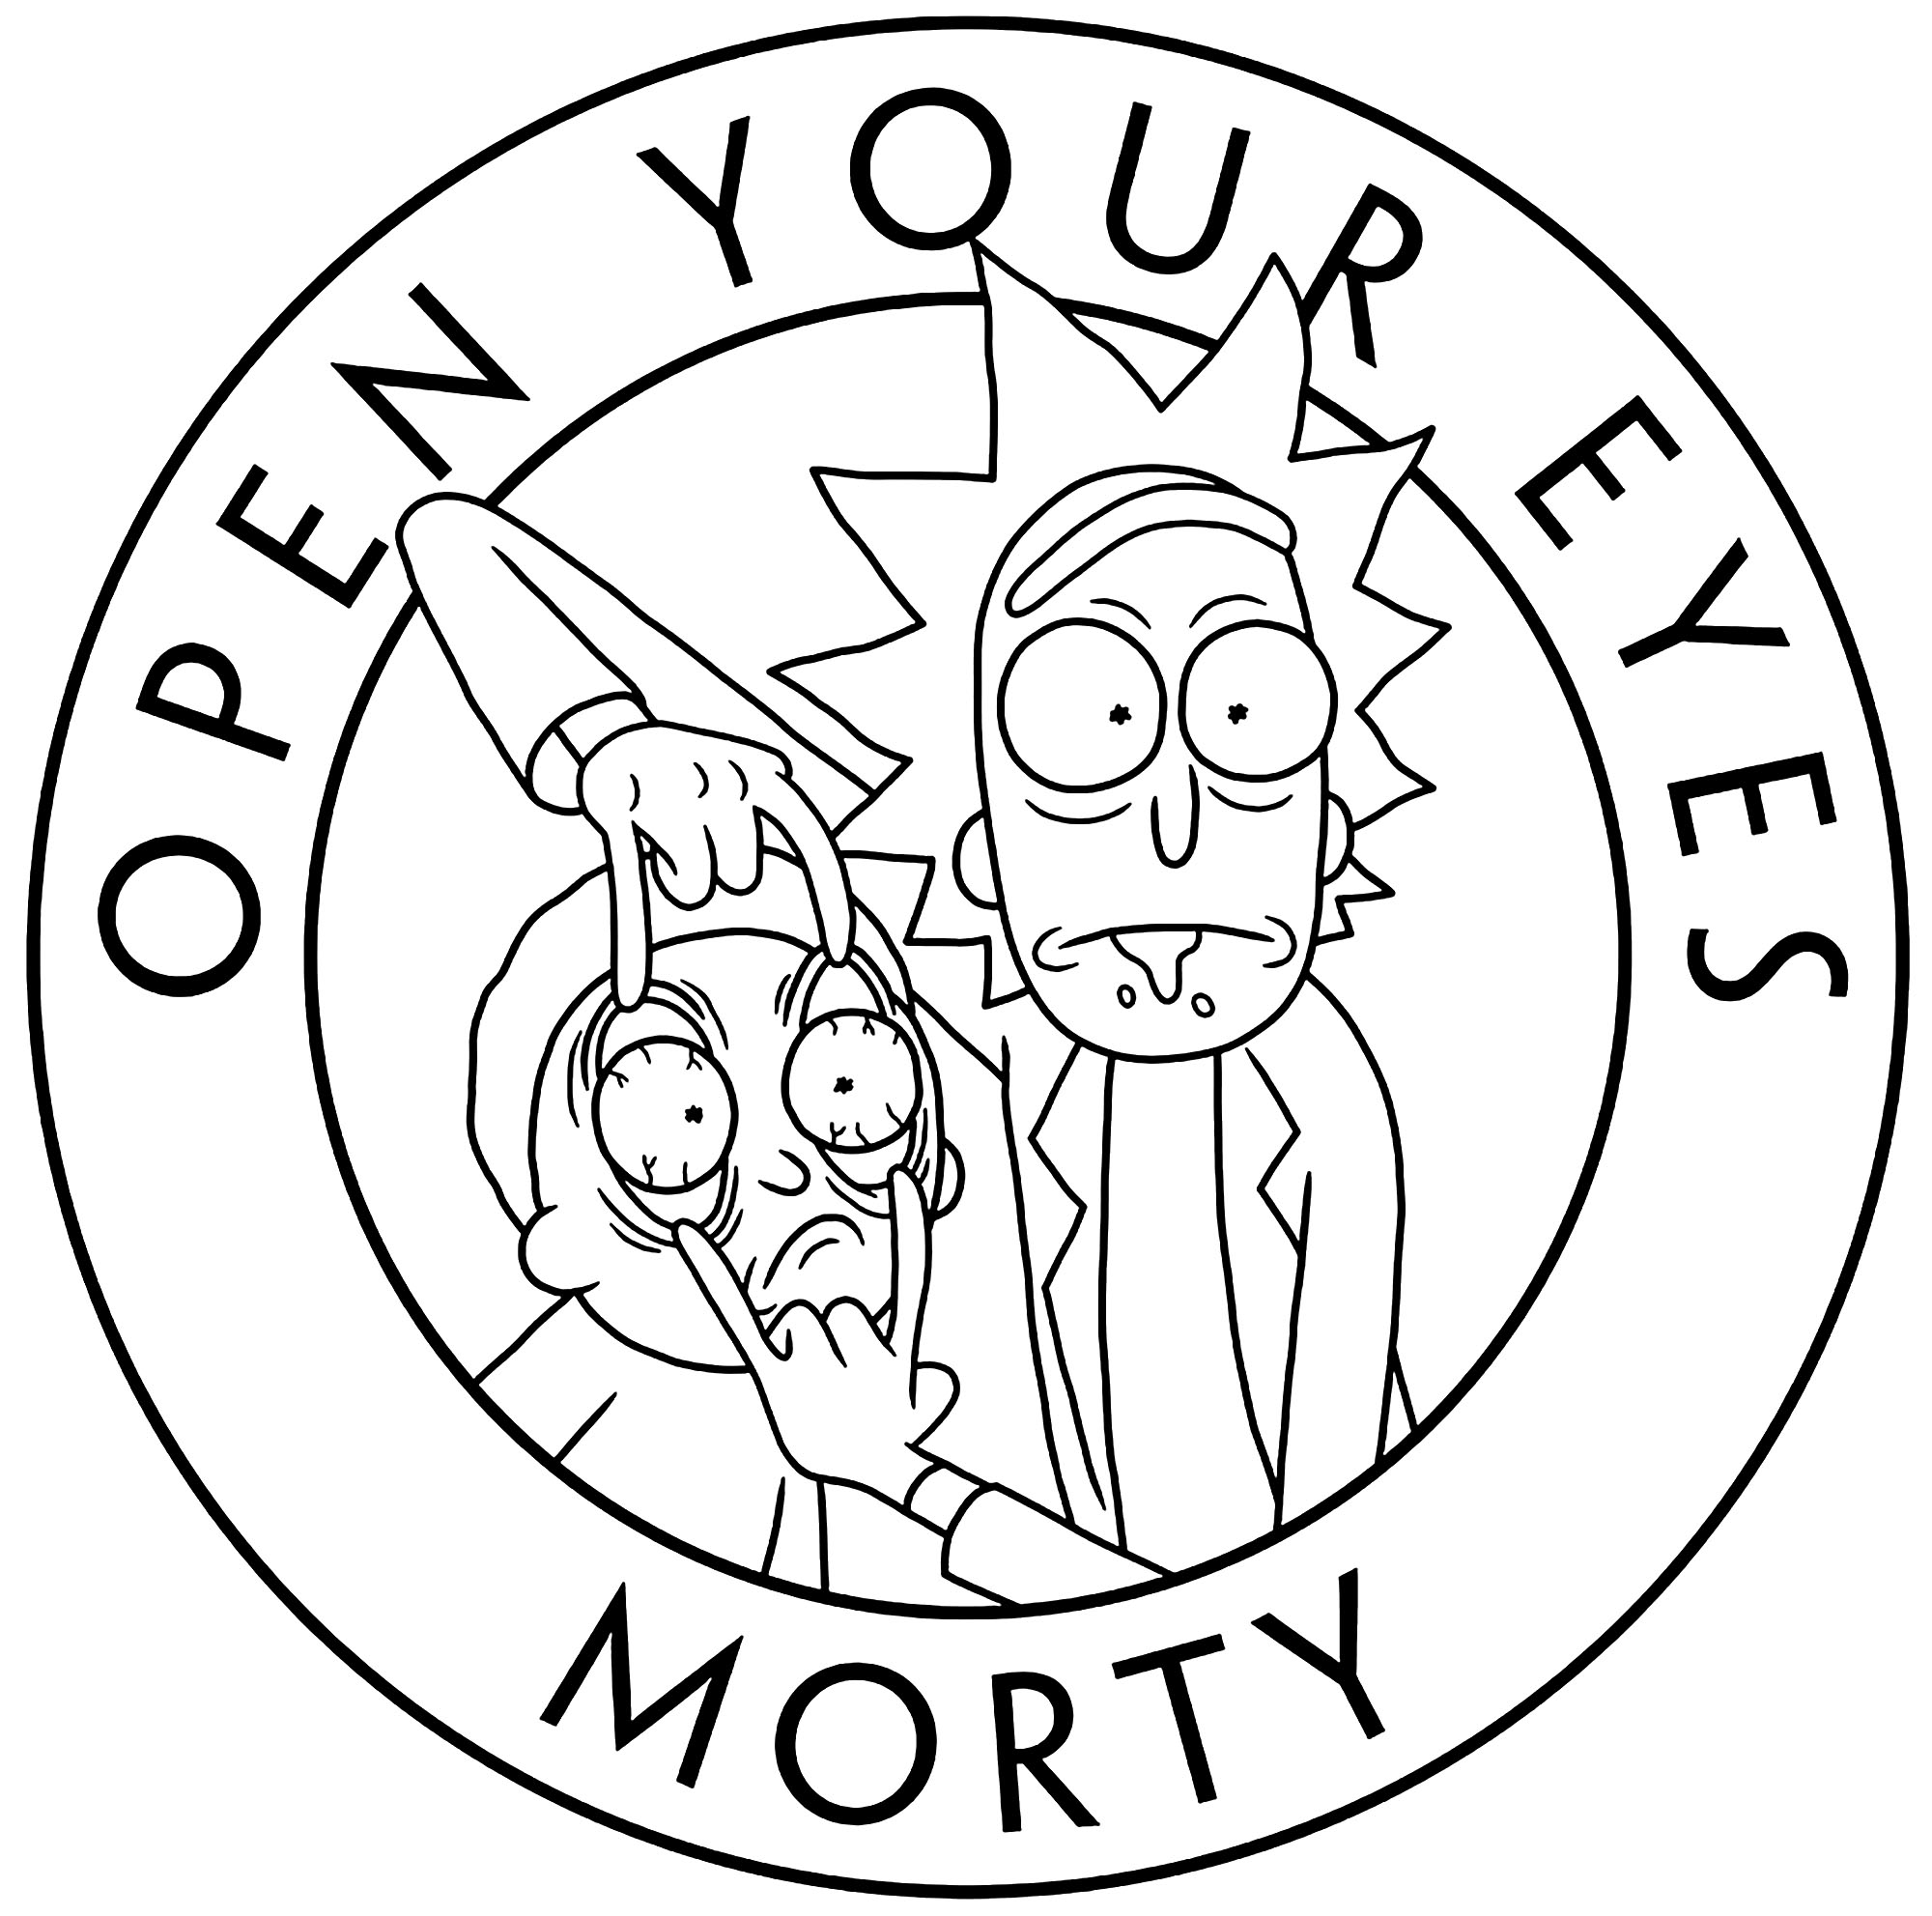 Rick and Morty : Open your eyes - TV shows Adult Coloring Pages